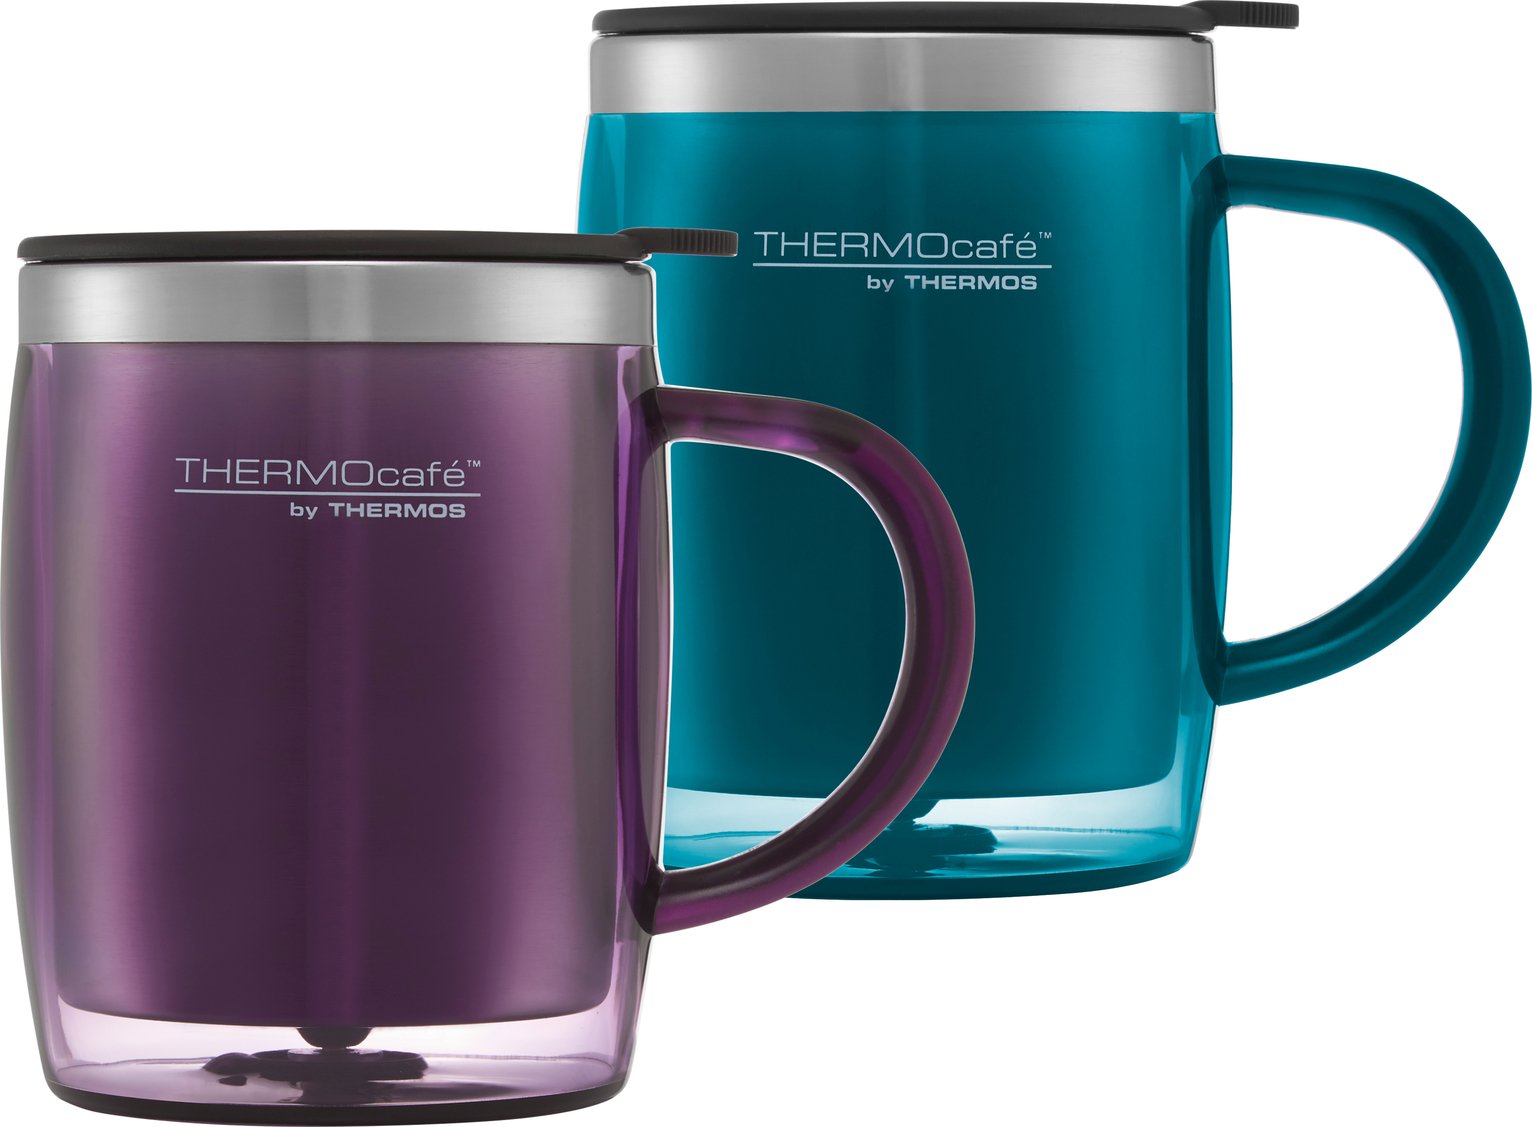 ThermoCafe by Thermos Translucent Travel Mug - 450ml